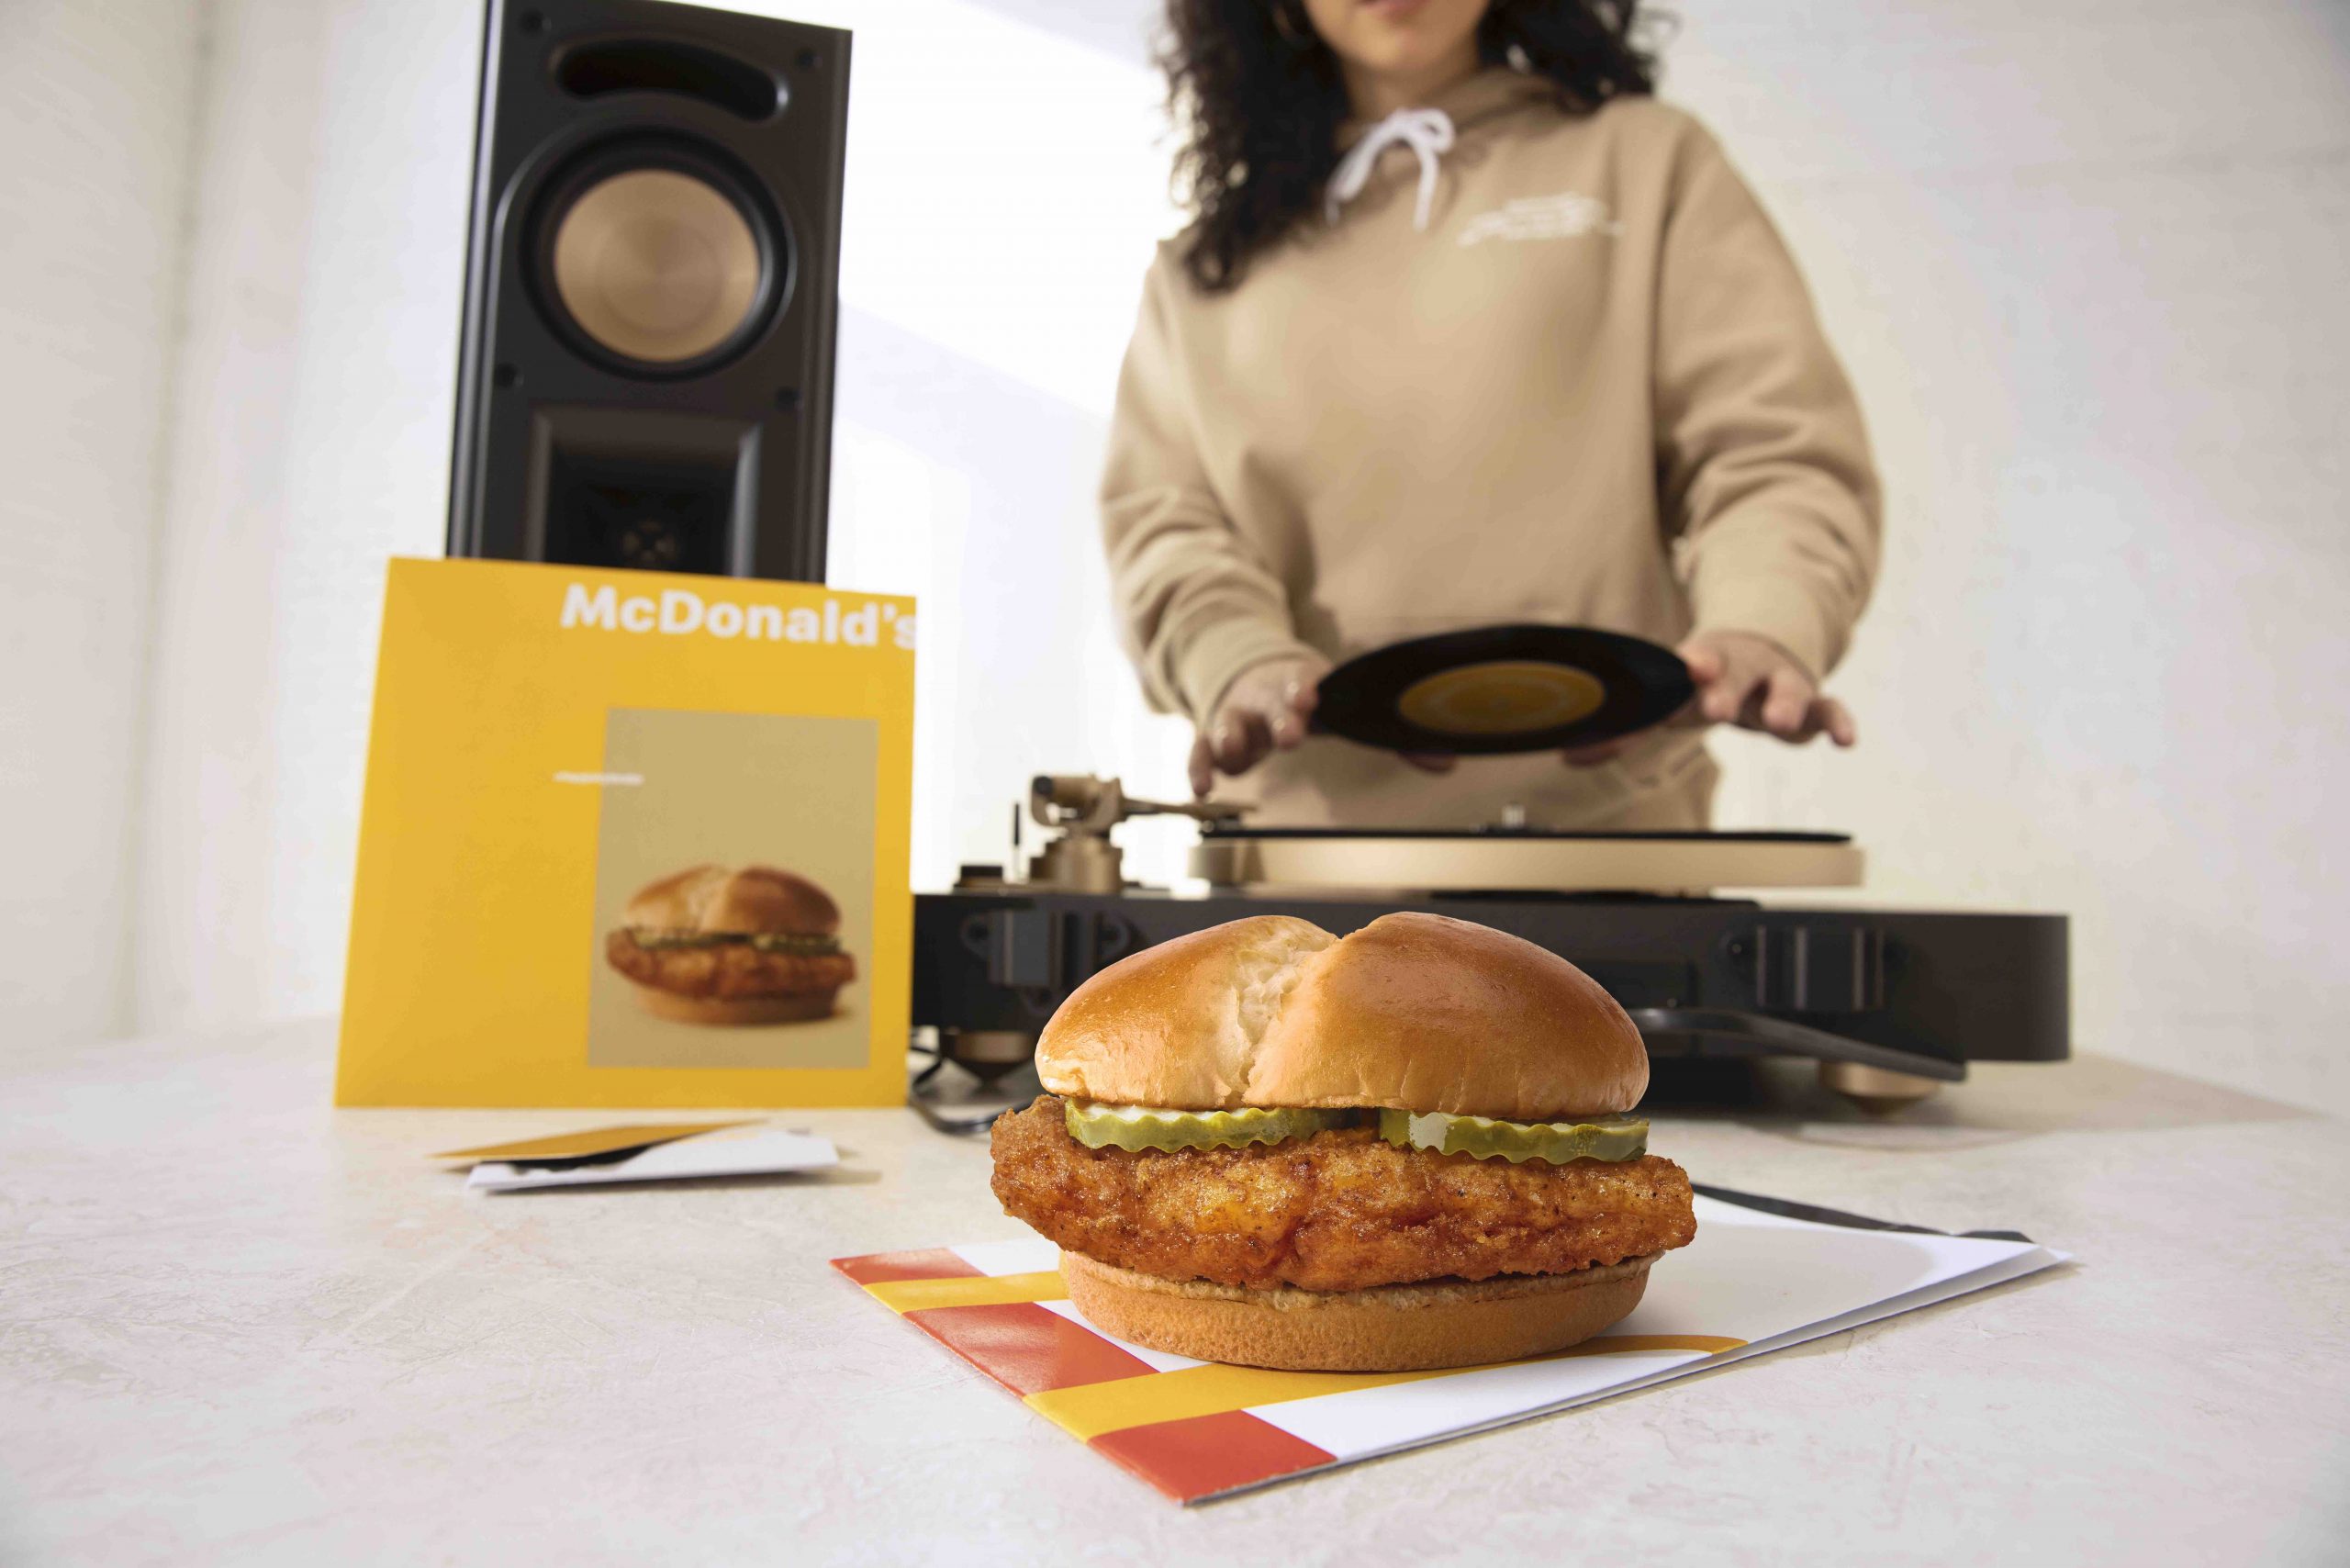 McDonald's crispy chicken sandwich in front of a dj and other McDonald's swag